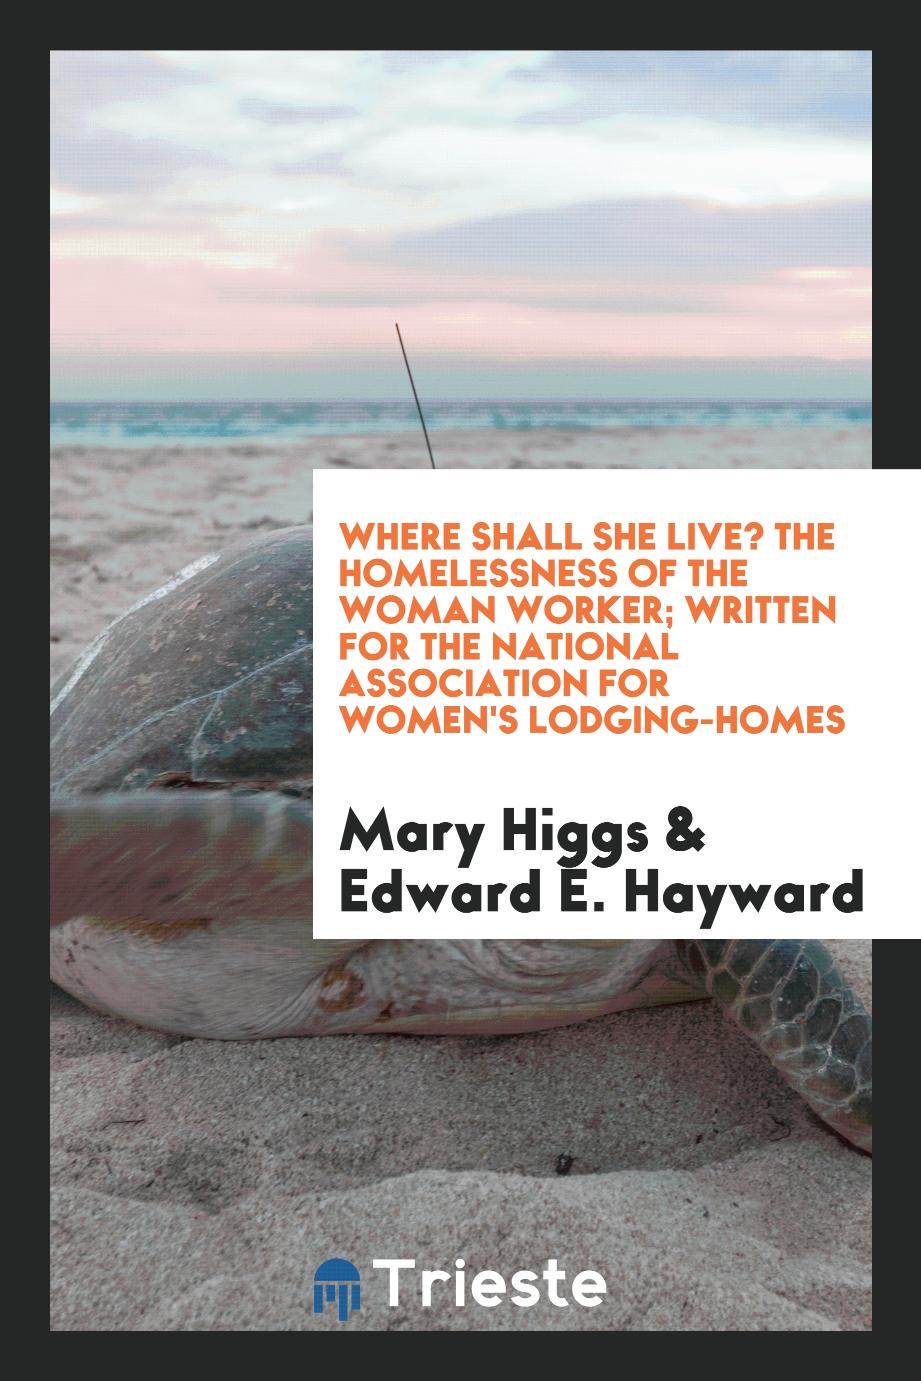 Where shall she live? The homelessness of the woman worker; written for the National Association for Women's Lodging-homes